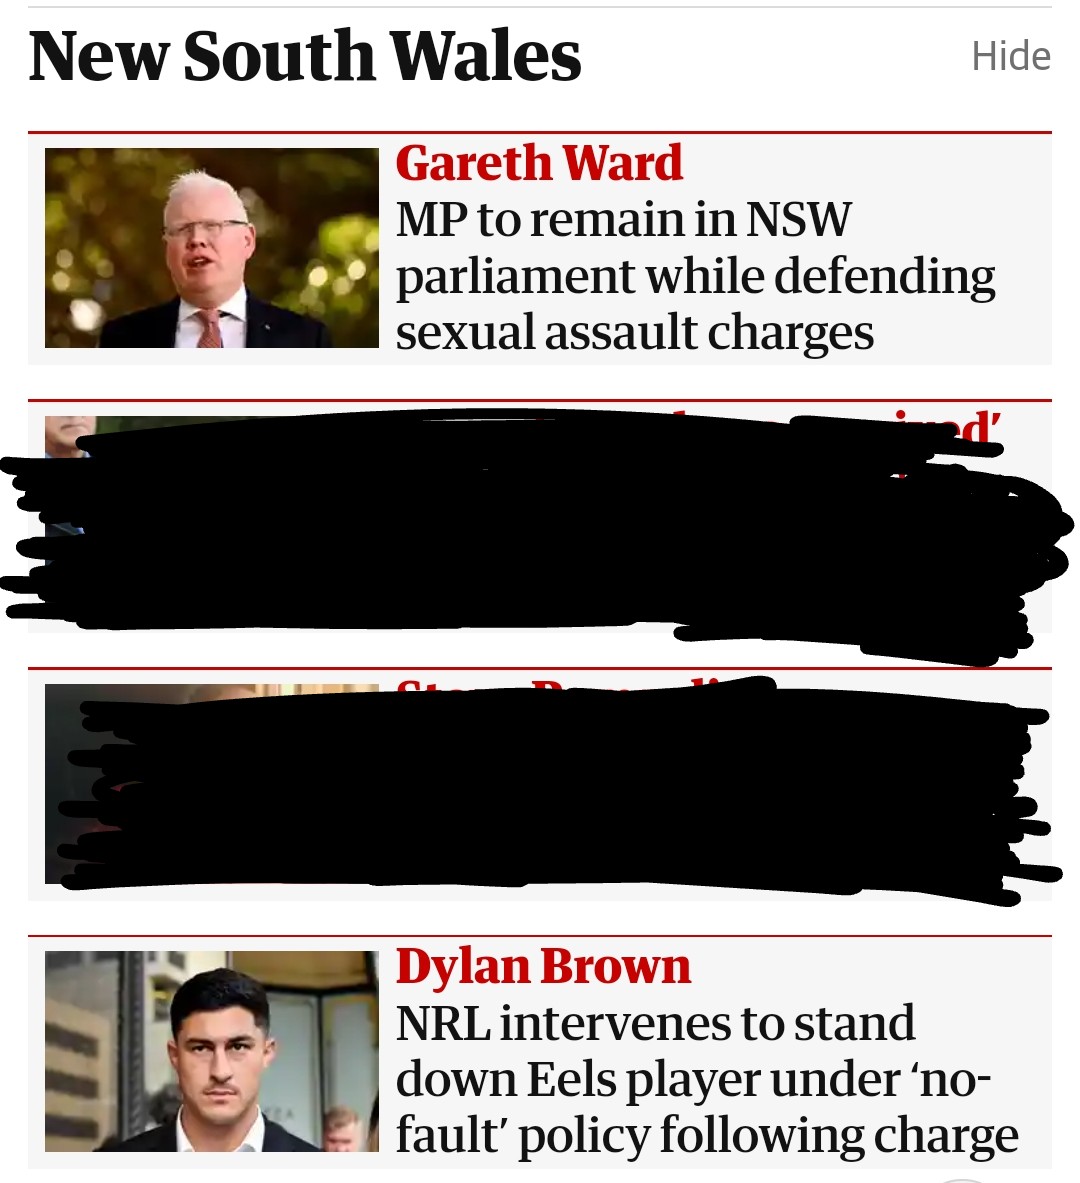 The #nrl taking the decisive step to stand down #dylanbrown while our so-called elected officials turn a blind eye to #garethward on the same charges tells you everything you need to know about the sickening nature of our useless #nswgovernment. Pathetic. 'One rule for thee...'